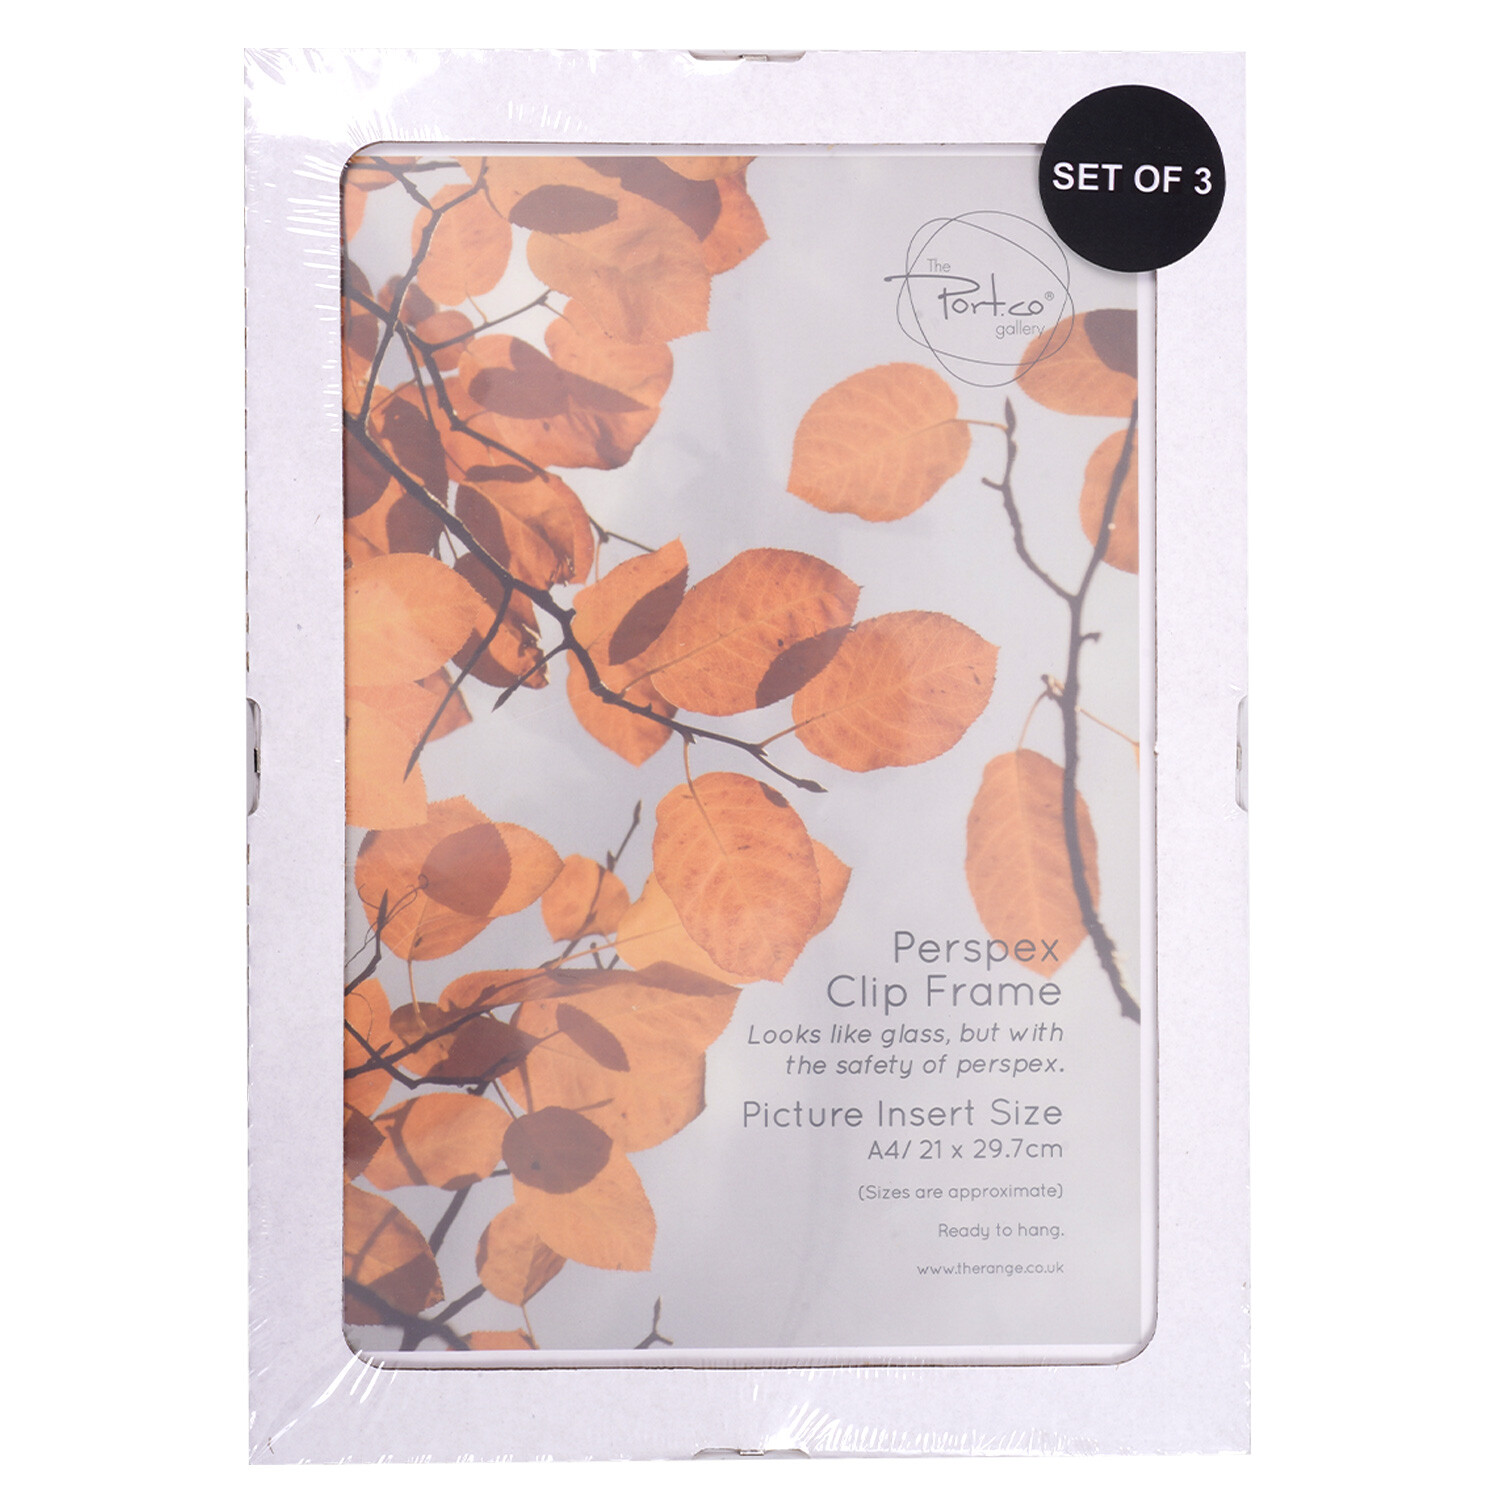 Set of 3 Perspex Clip Frames - Clear Image 4